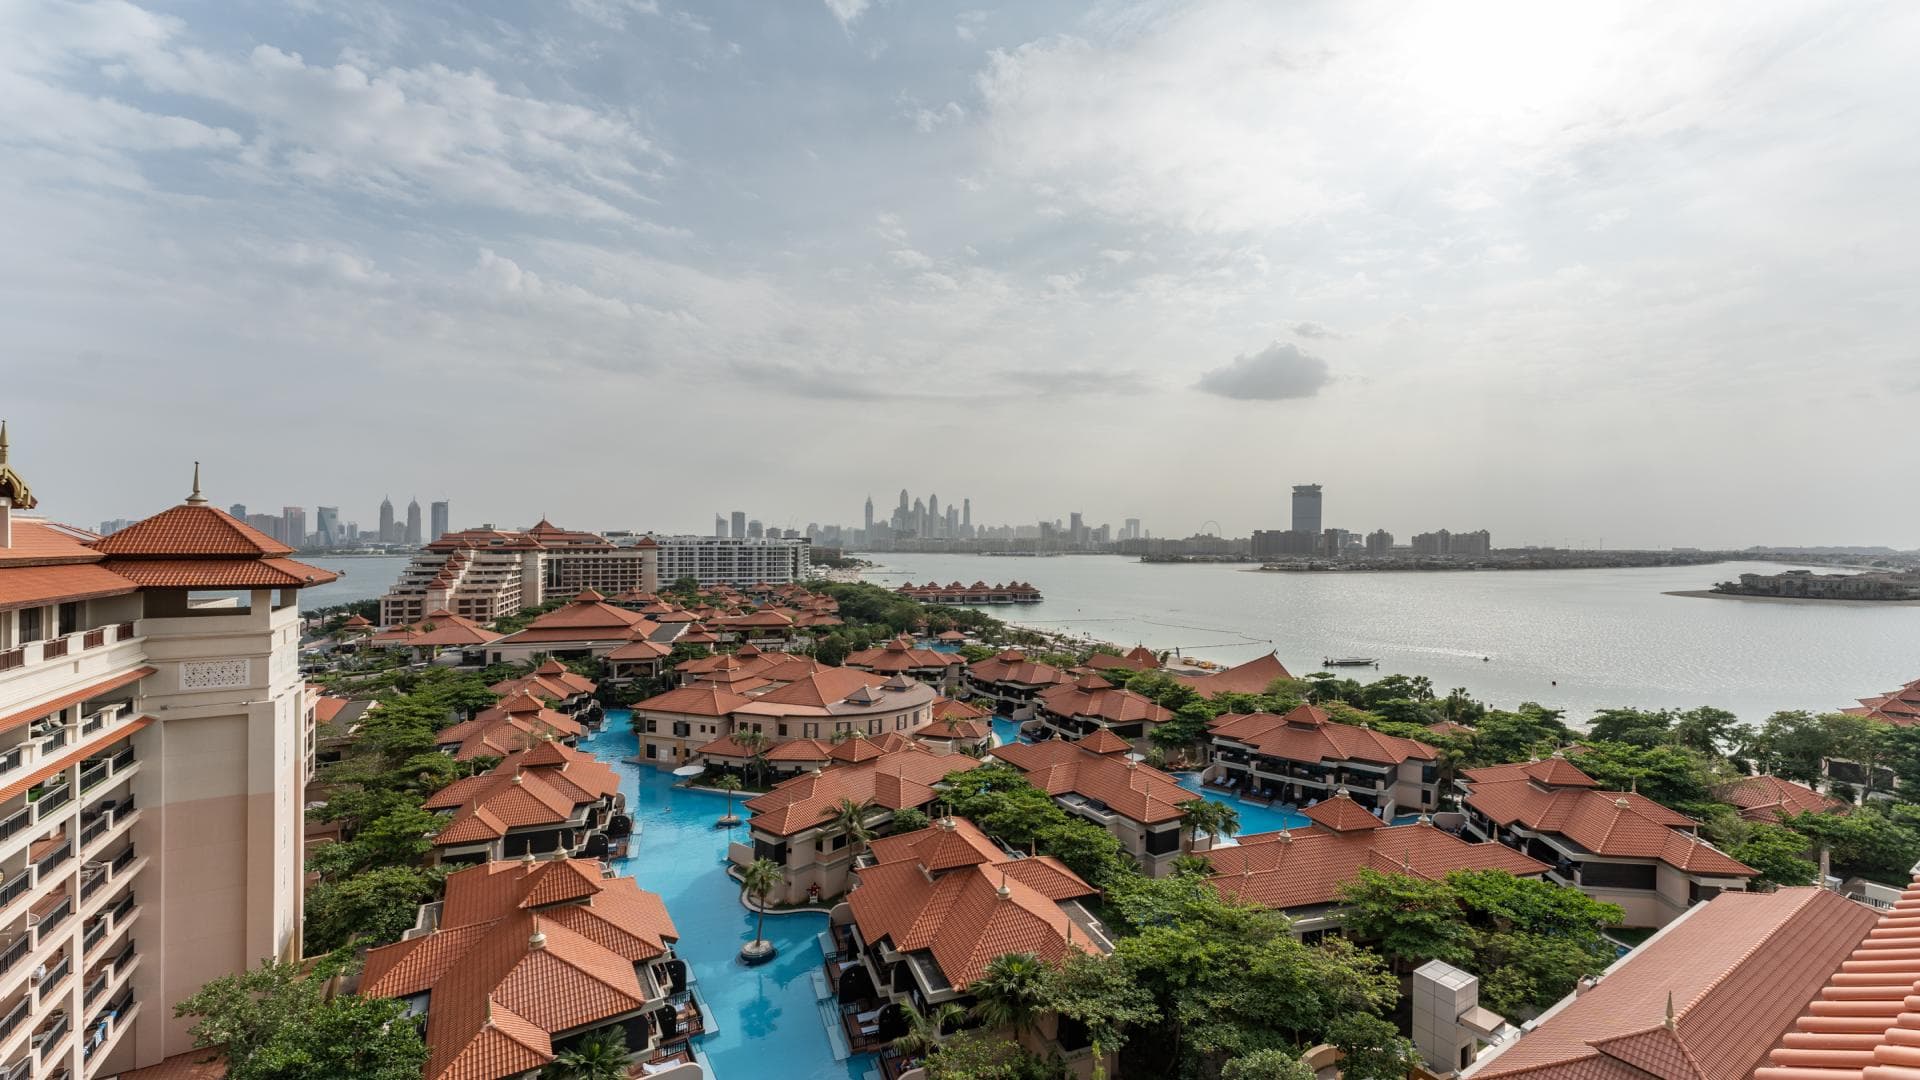 0 Bedroom Apartment For Sale Marina View Tower A Lp38654 2eea69b080768400.jpg